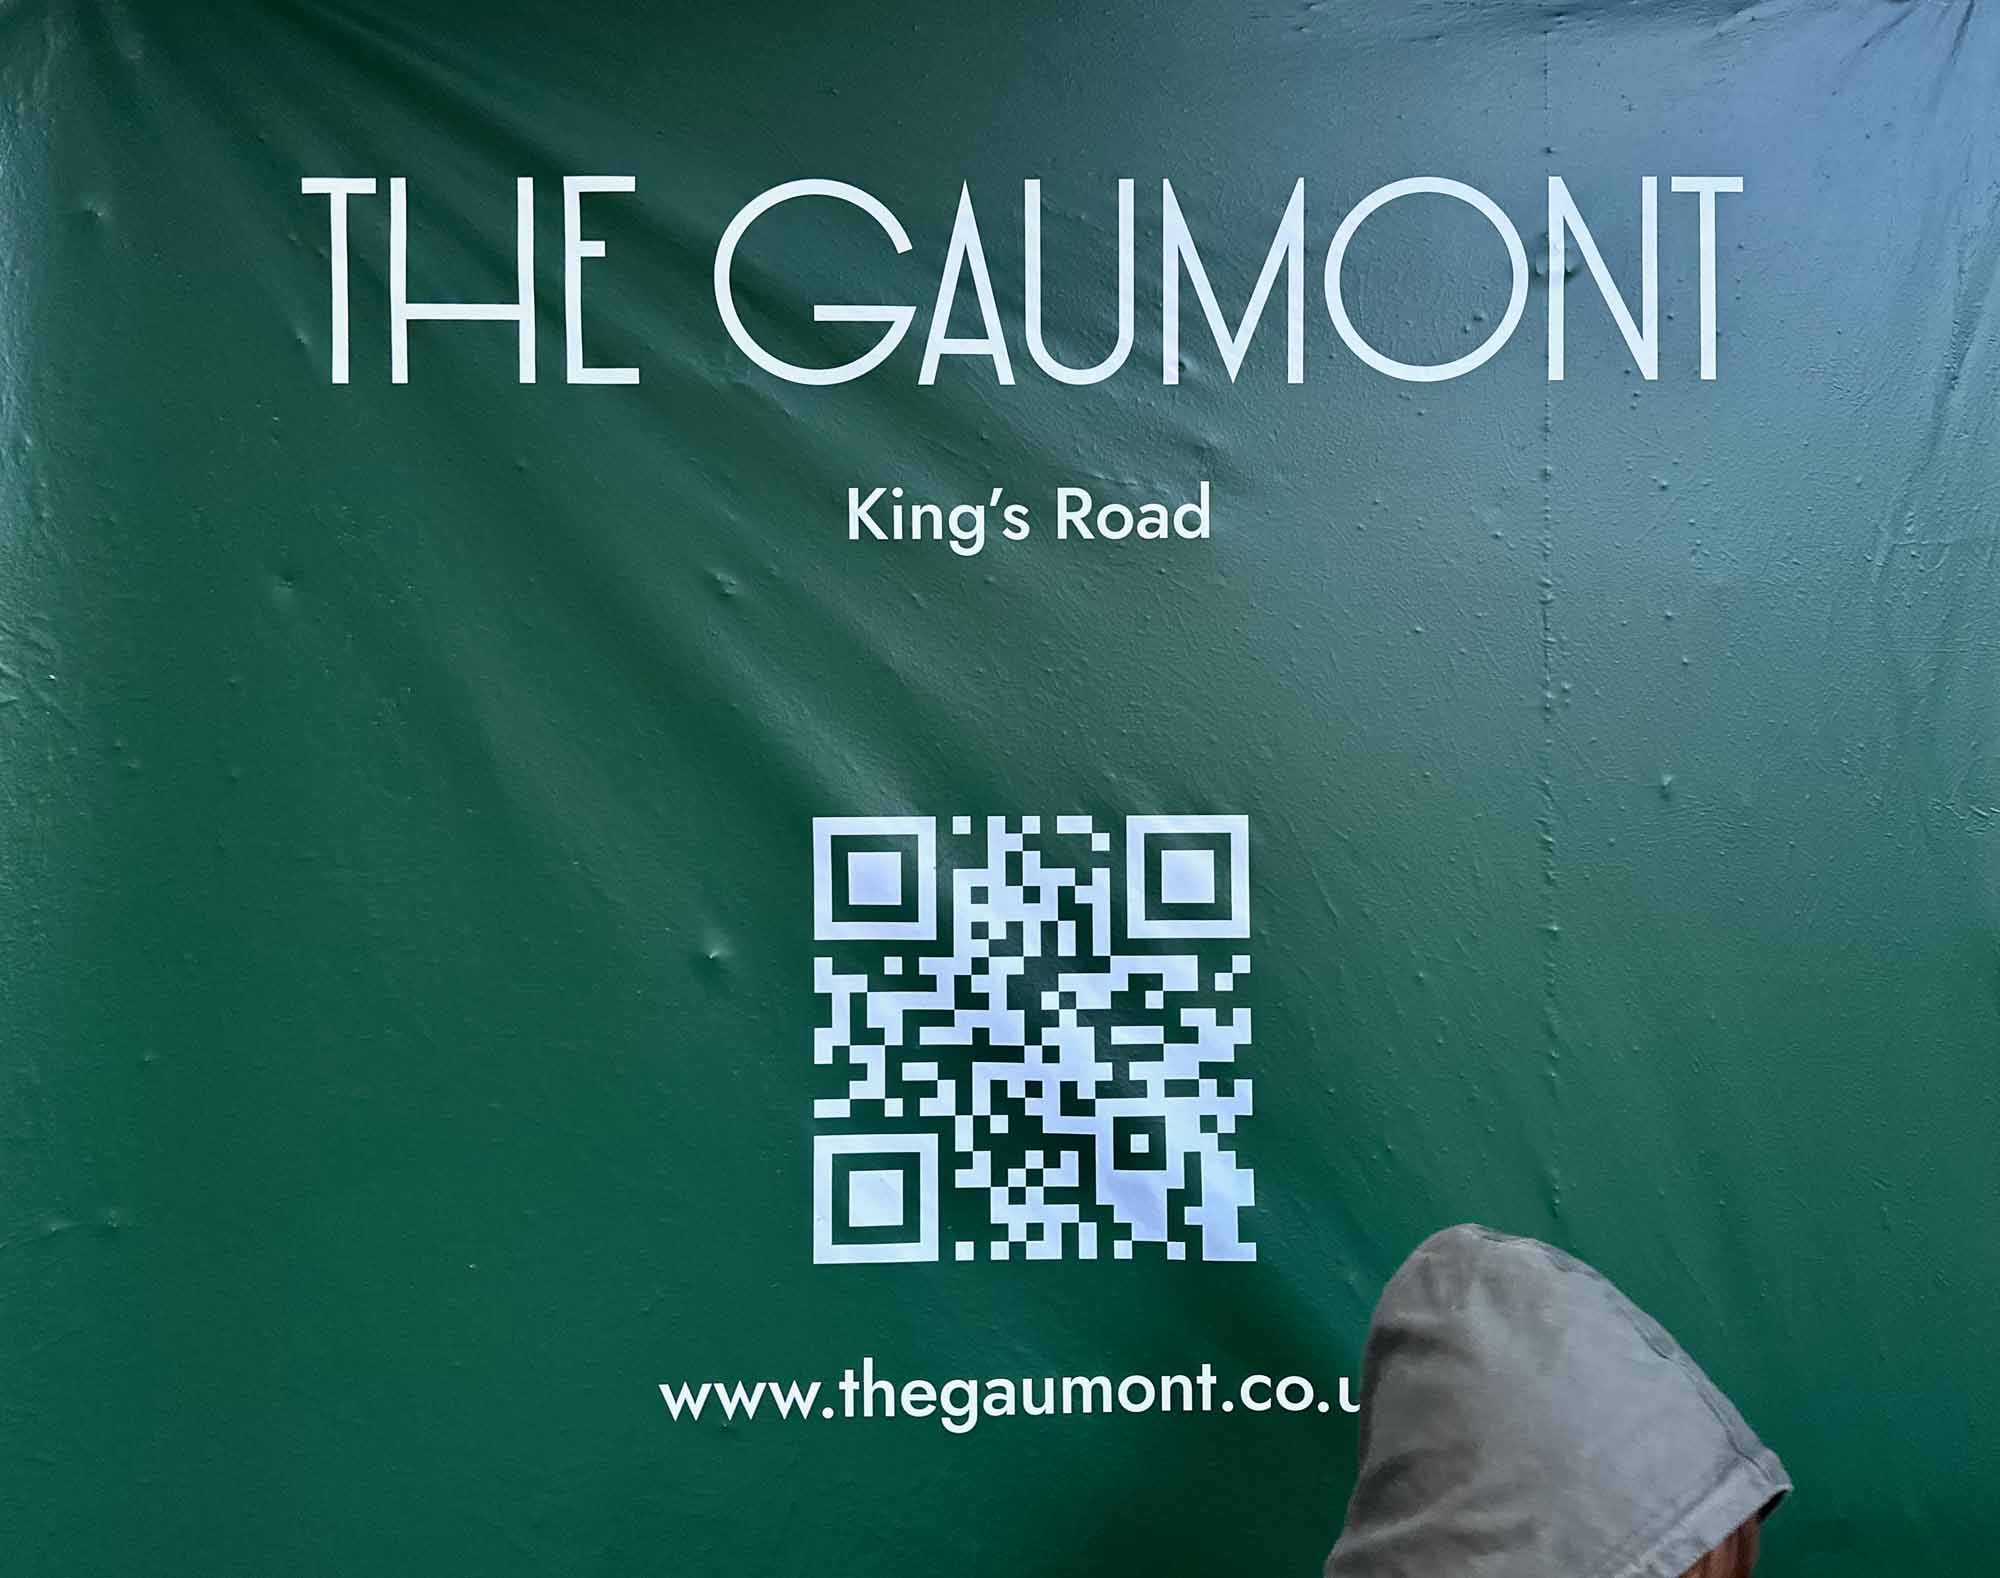 Introducing The Gaumont on King's Road in Chelsea